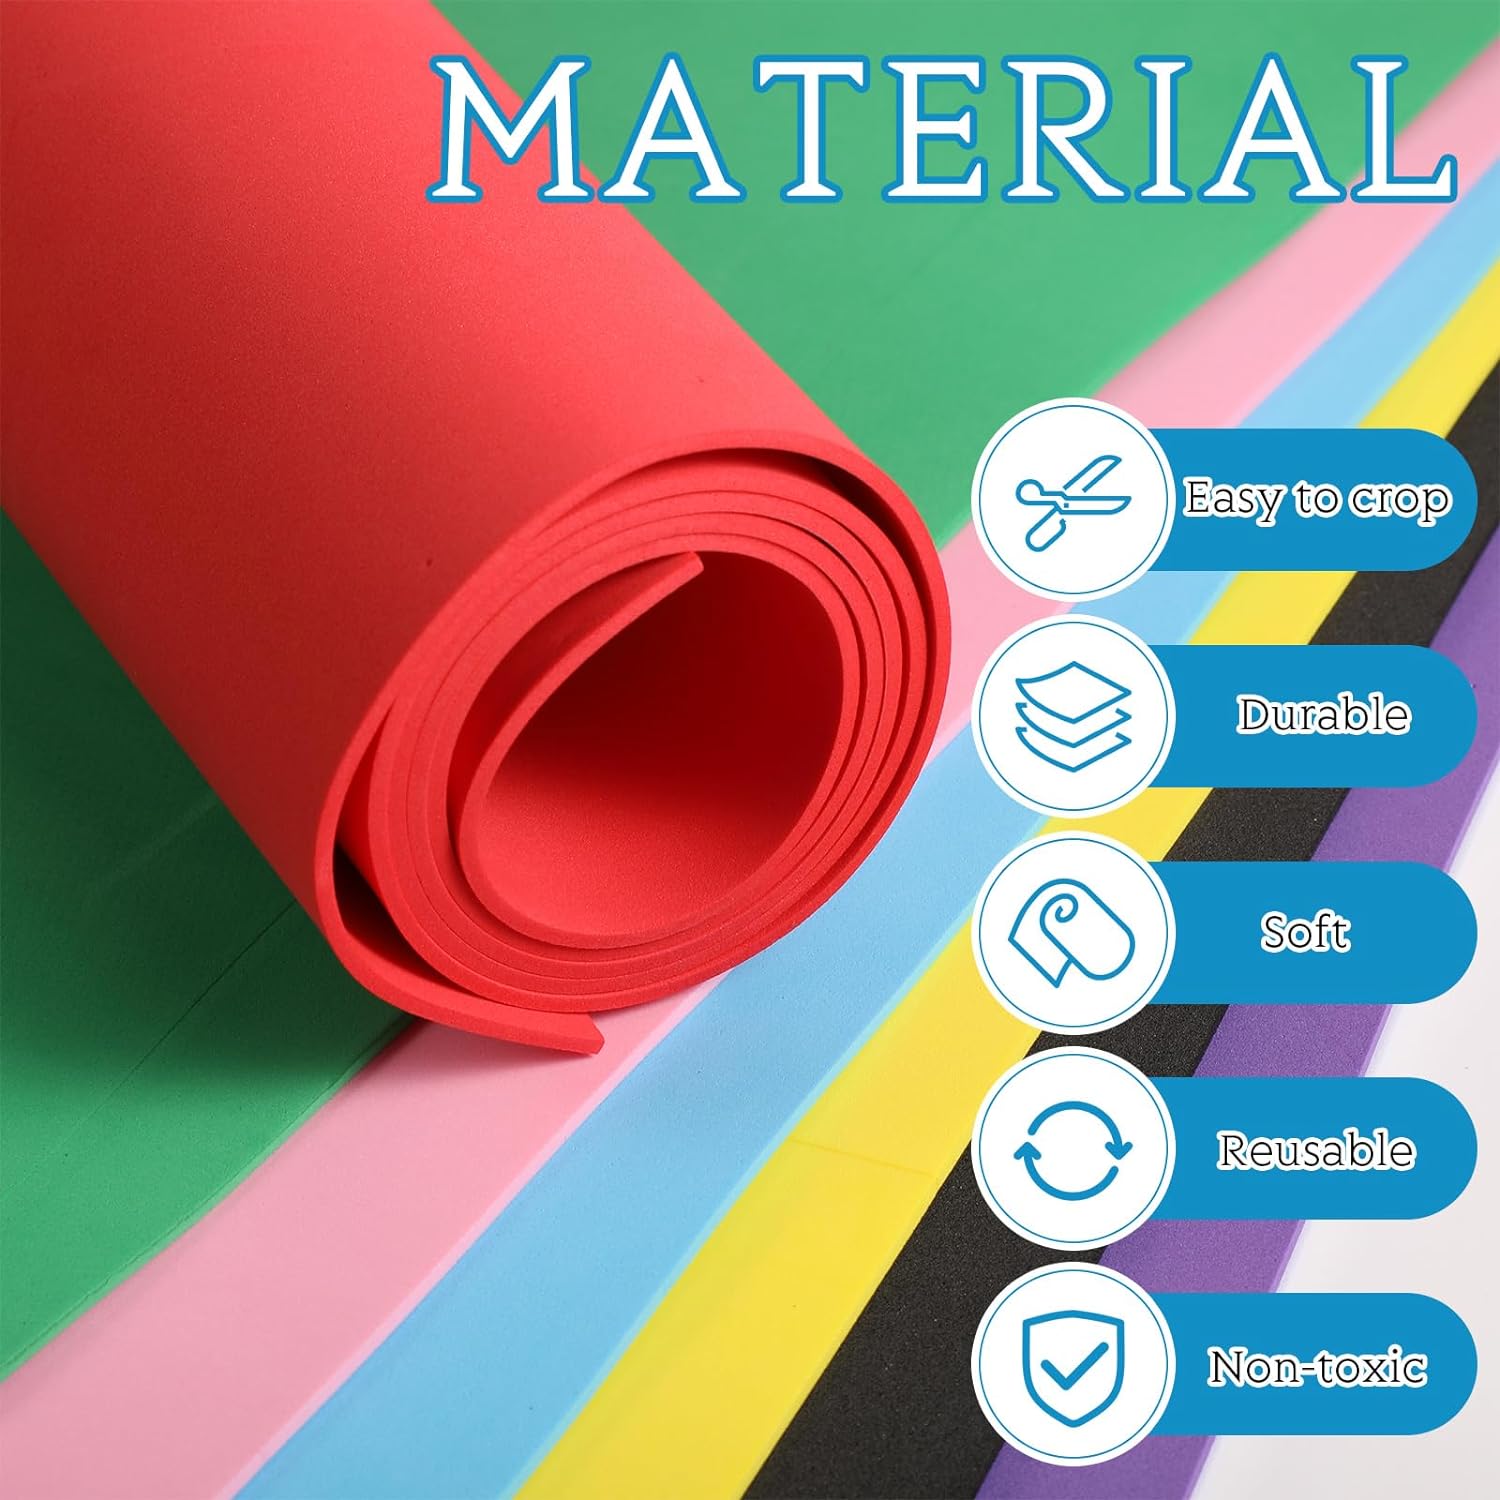 8 Pcs Craft Foam Sheets Bulk 39''x13'' Colored Eva Foam Roll High Density Foam Roll For Christmas Craft Classroom Scrapbooking DIY Cosplay Costume Armor Project Bright Colors 2 mm Thick By PAIDU)